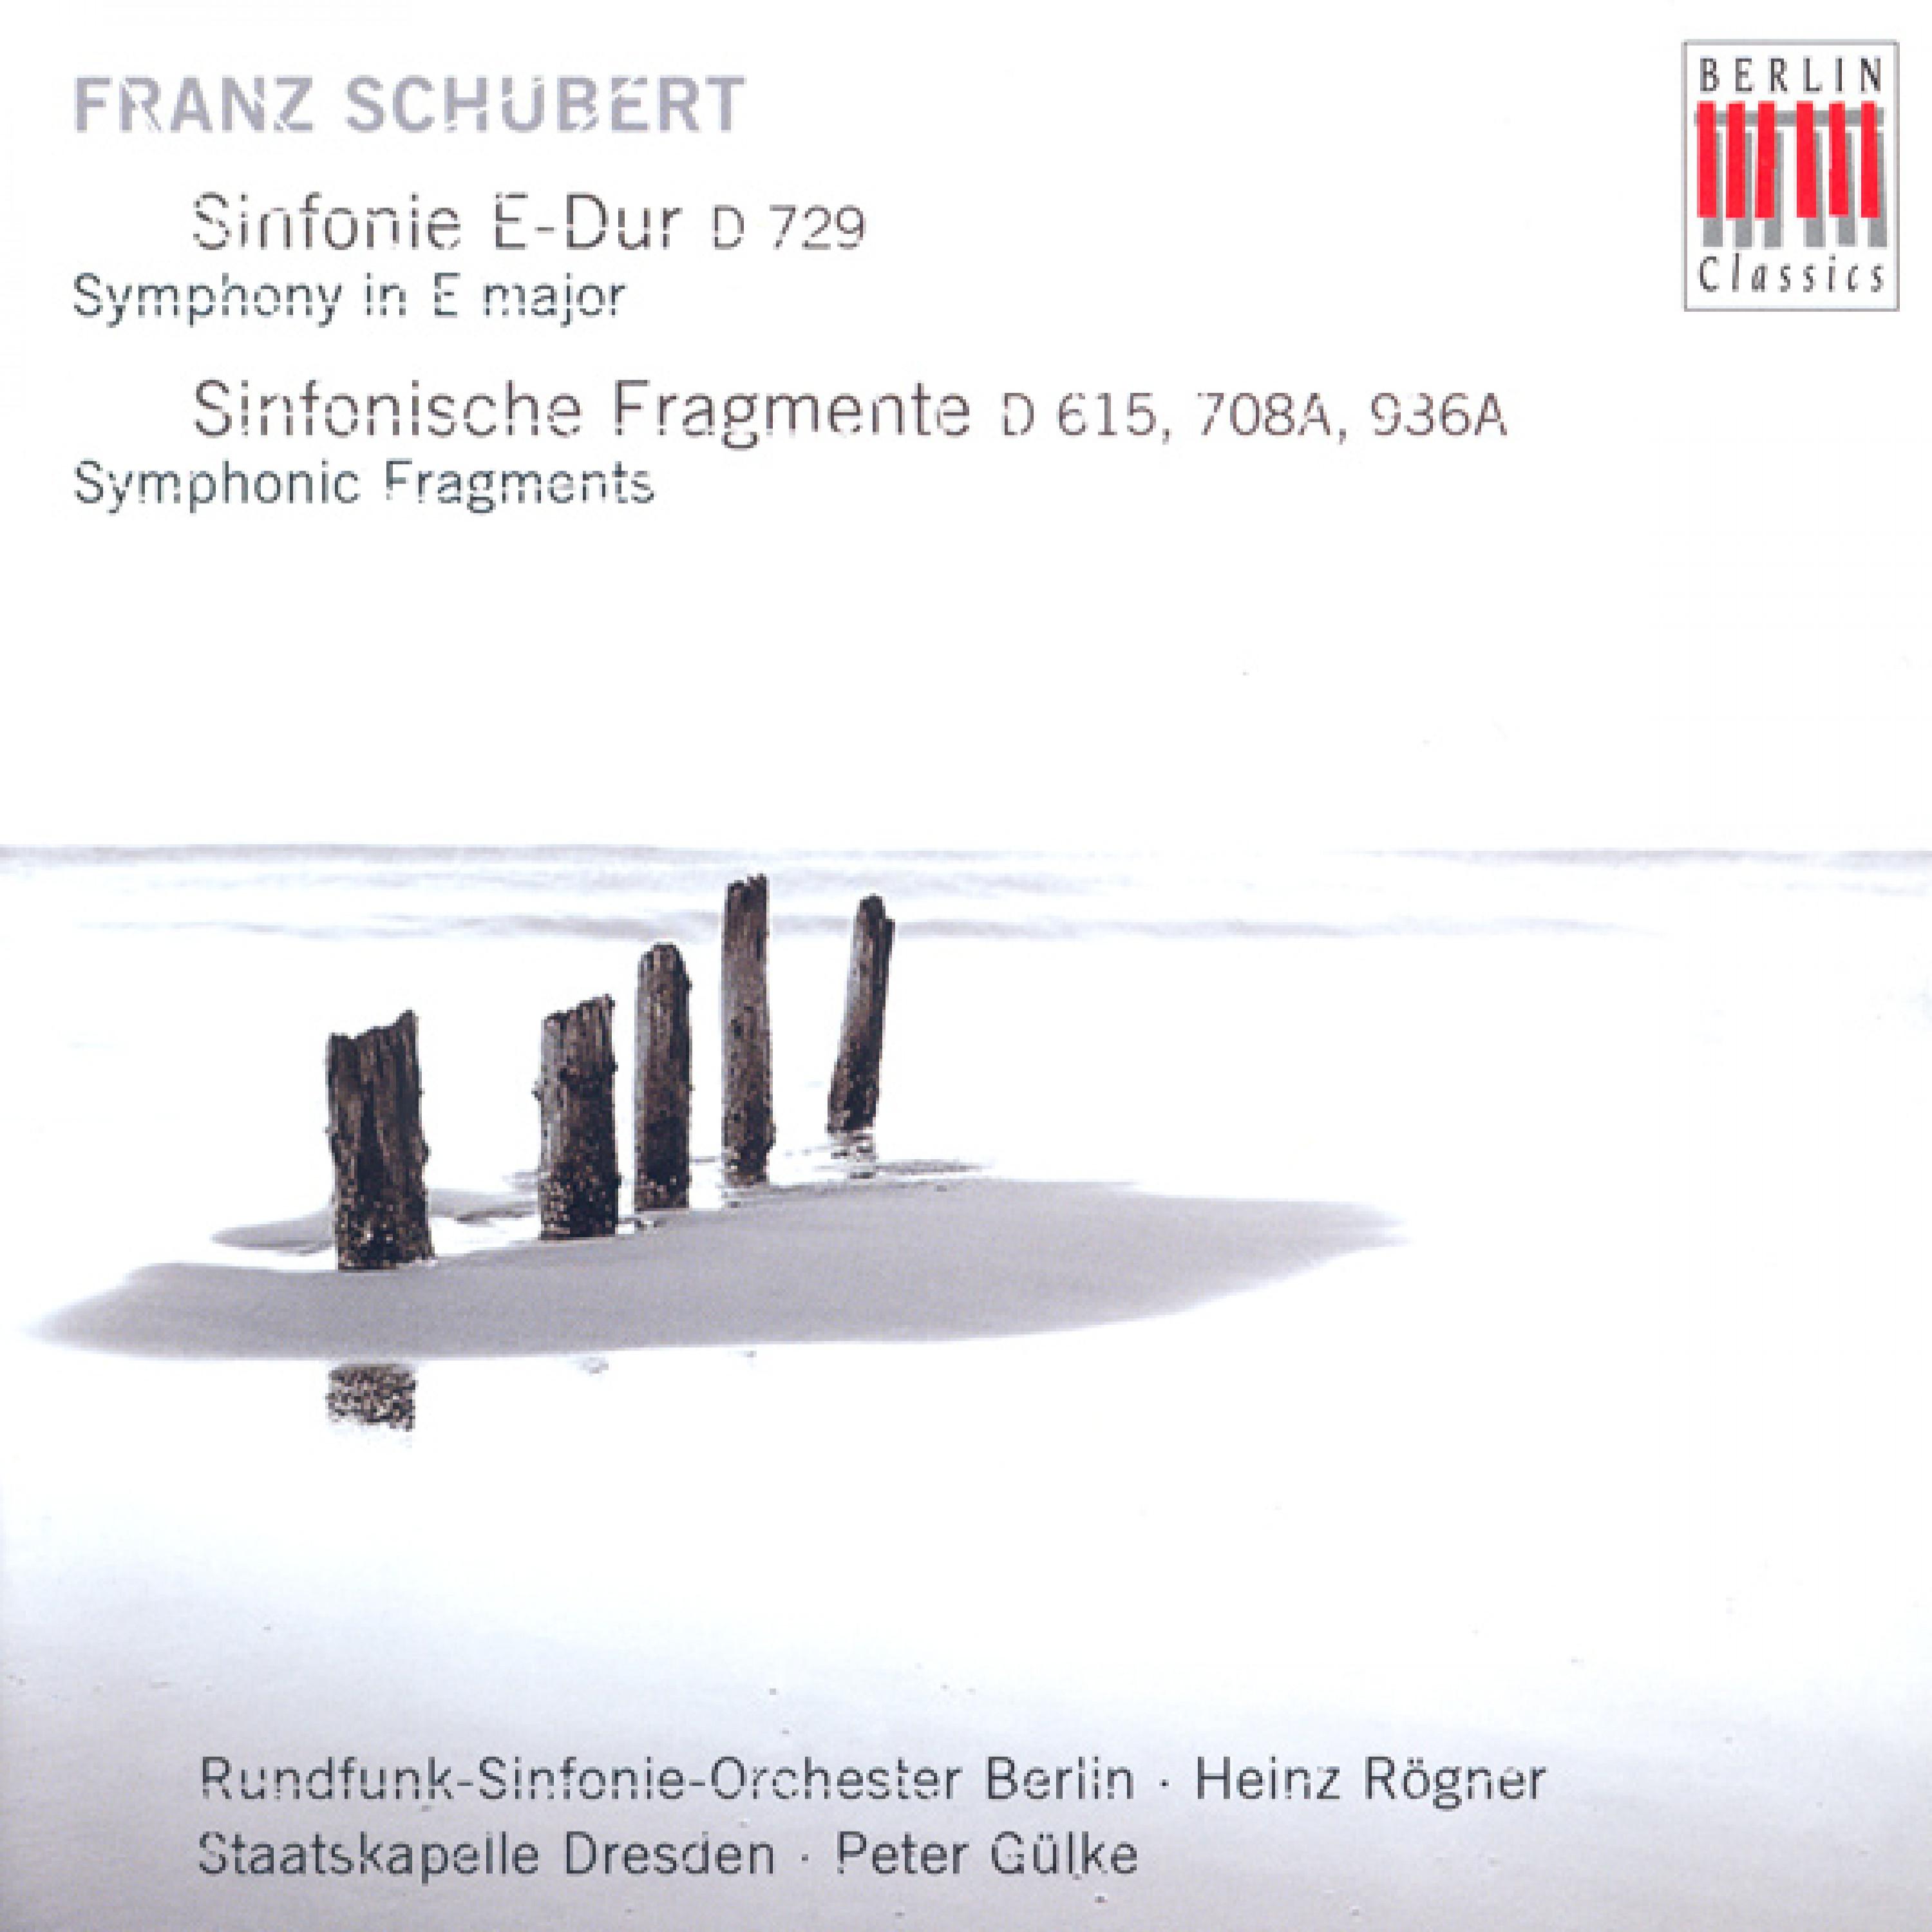 Variations and Fugue On a Theme of Mozart, Op. 132: Variation 7 - Andante grazioso